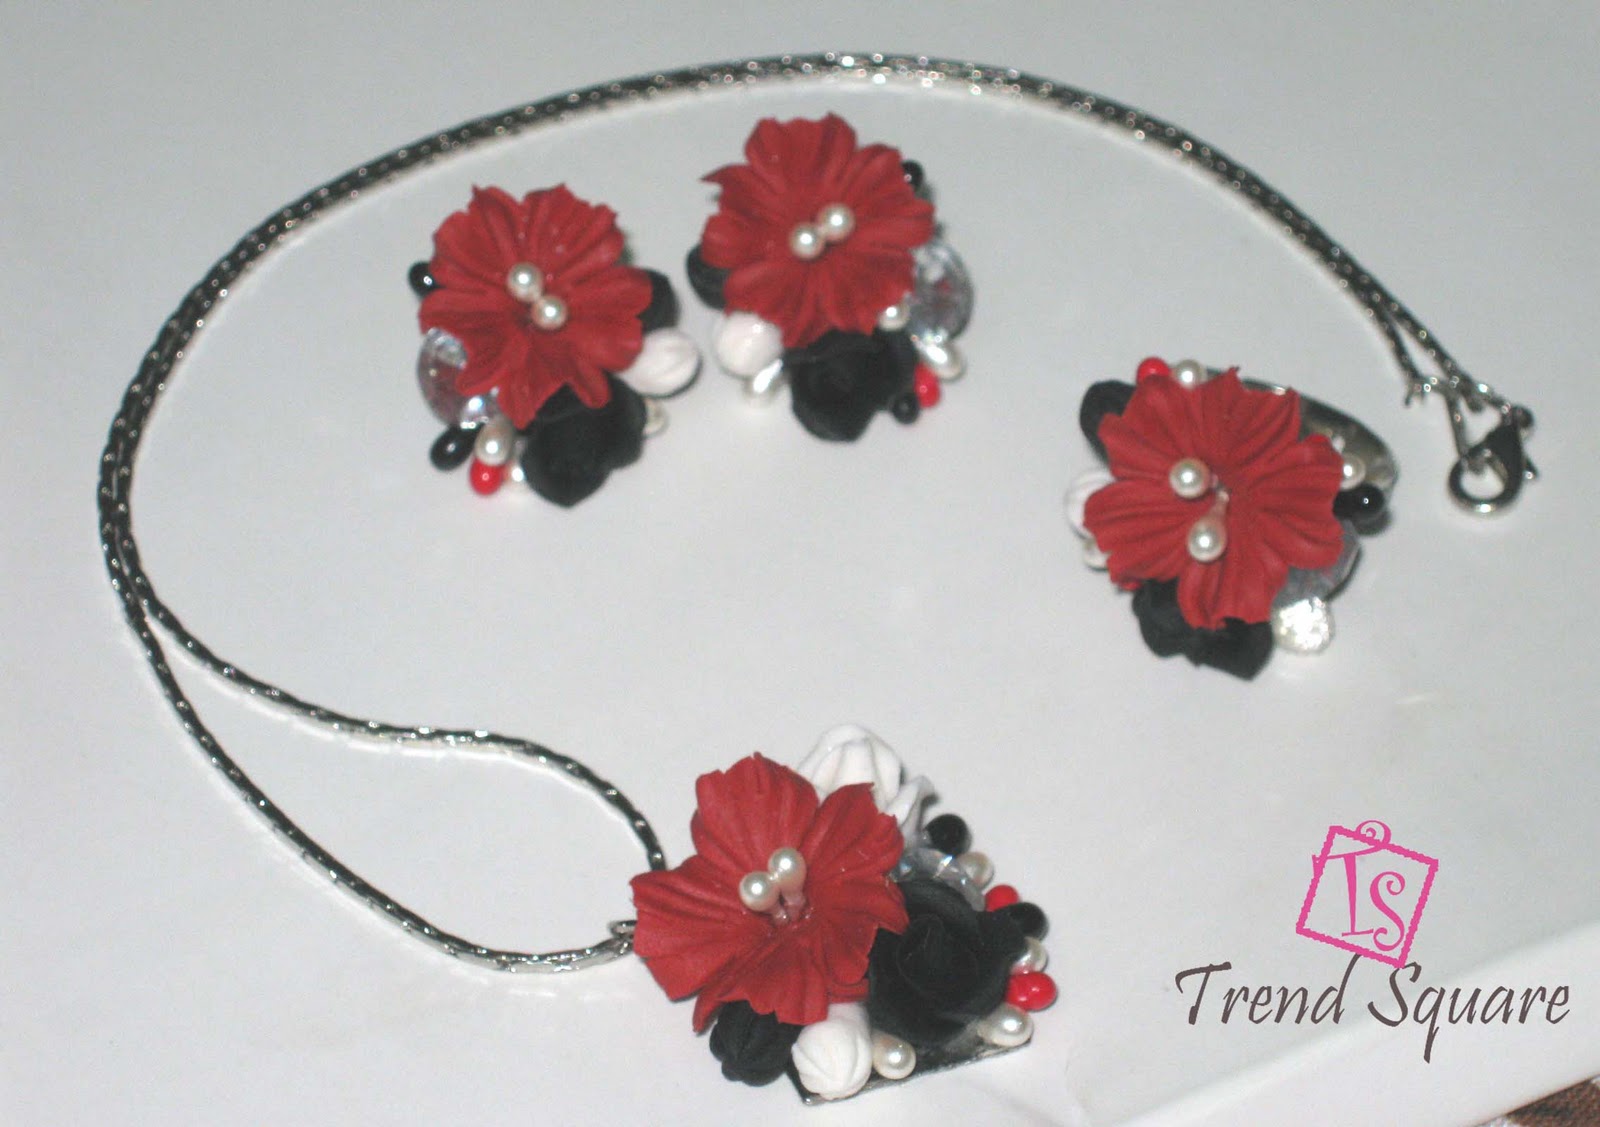 Trend Square: The Art of Red and Black (Jewelry Set)